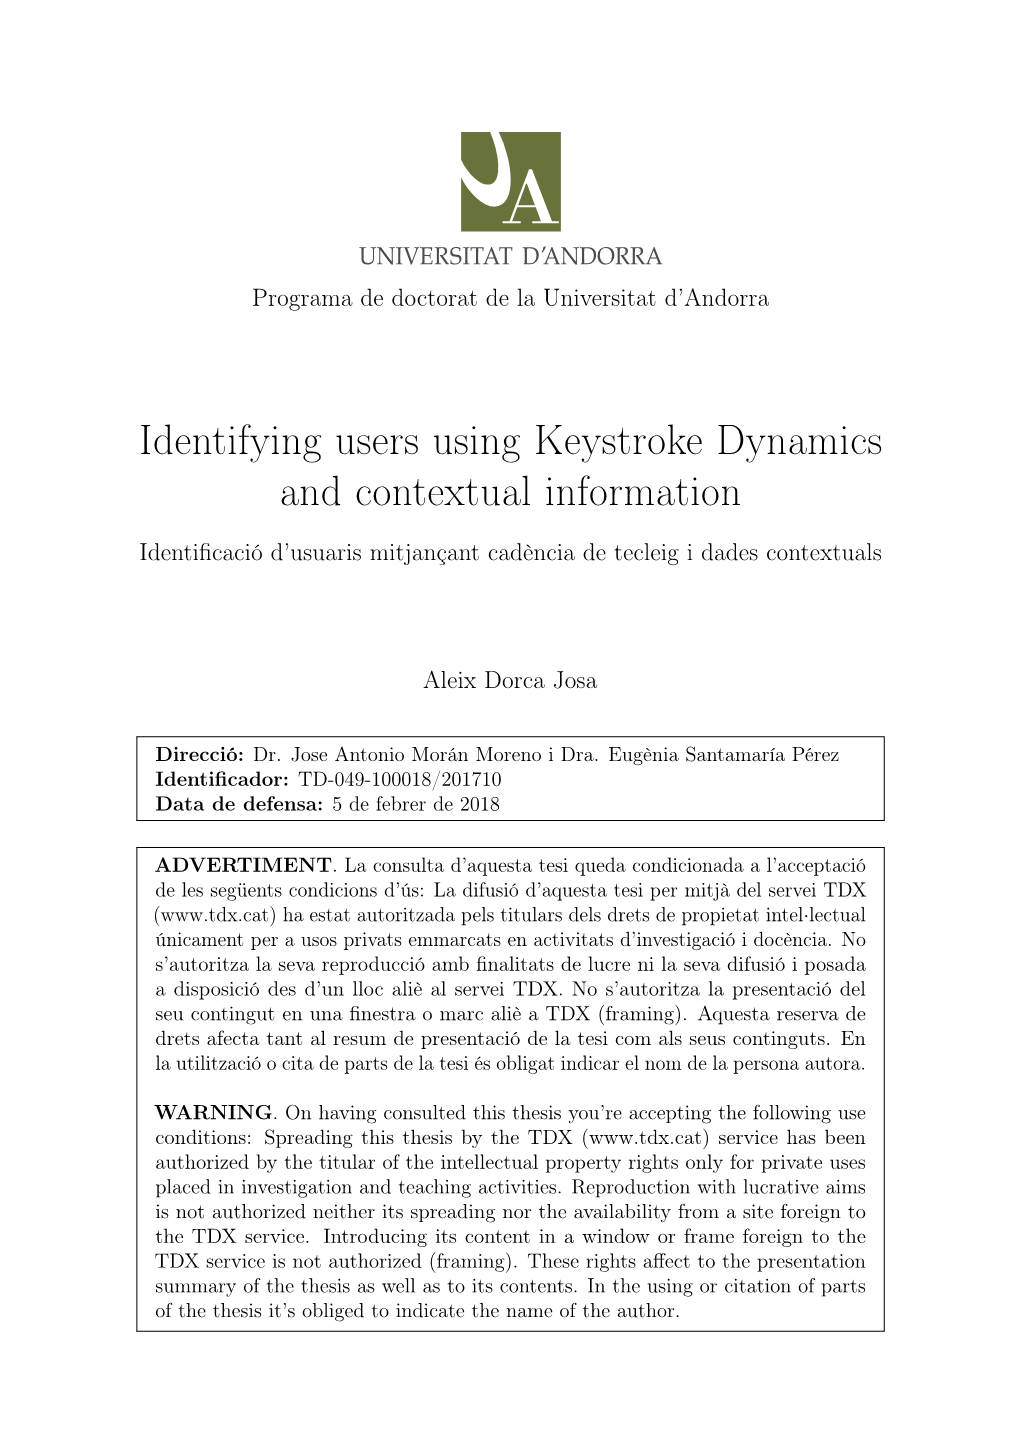 Identifying Users Using Keystroke Dynamics and Contextual Information